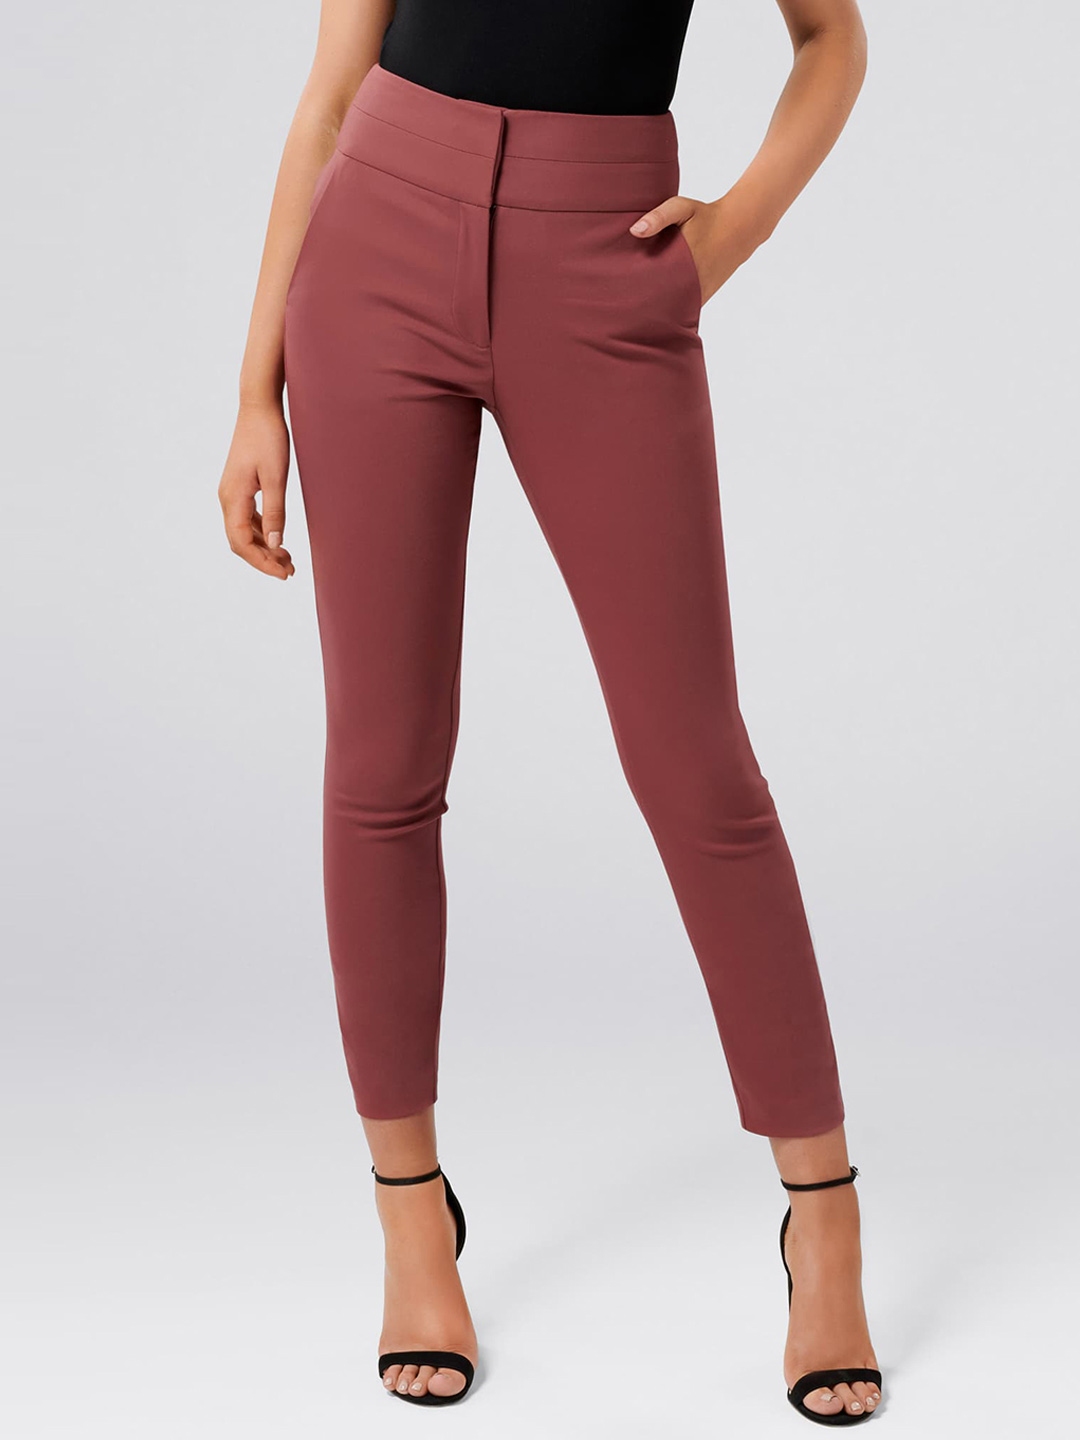 Buy Forever New Women Rust Red Slim Fit Solid Regular Trousers - Trousers for Women 9635059 | Myntra